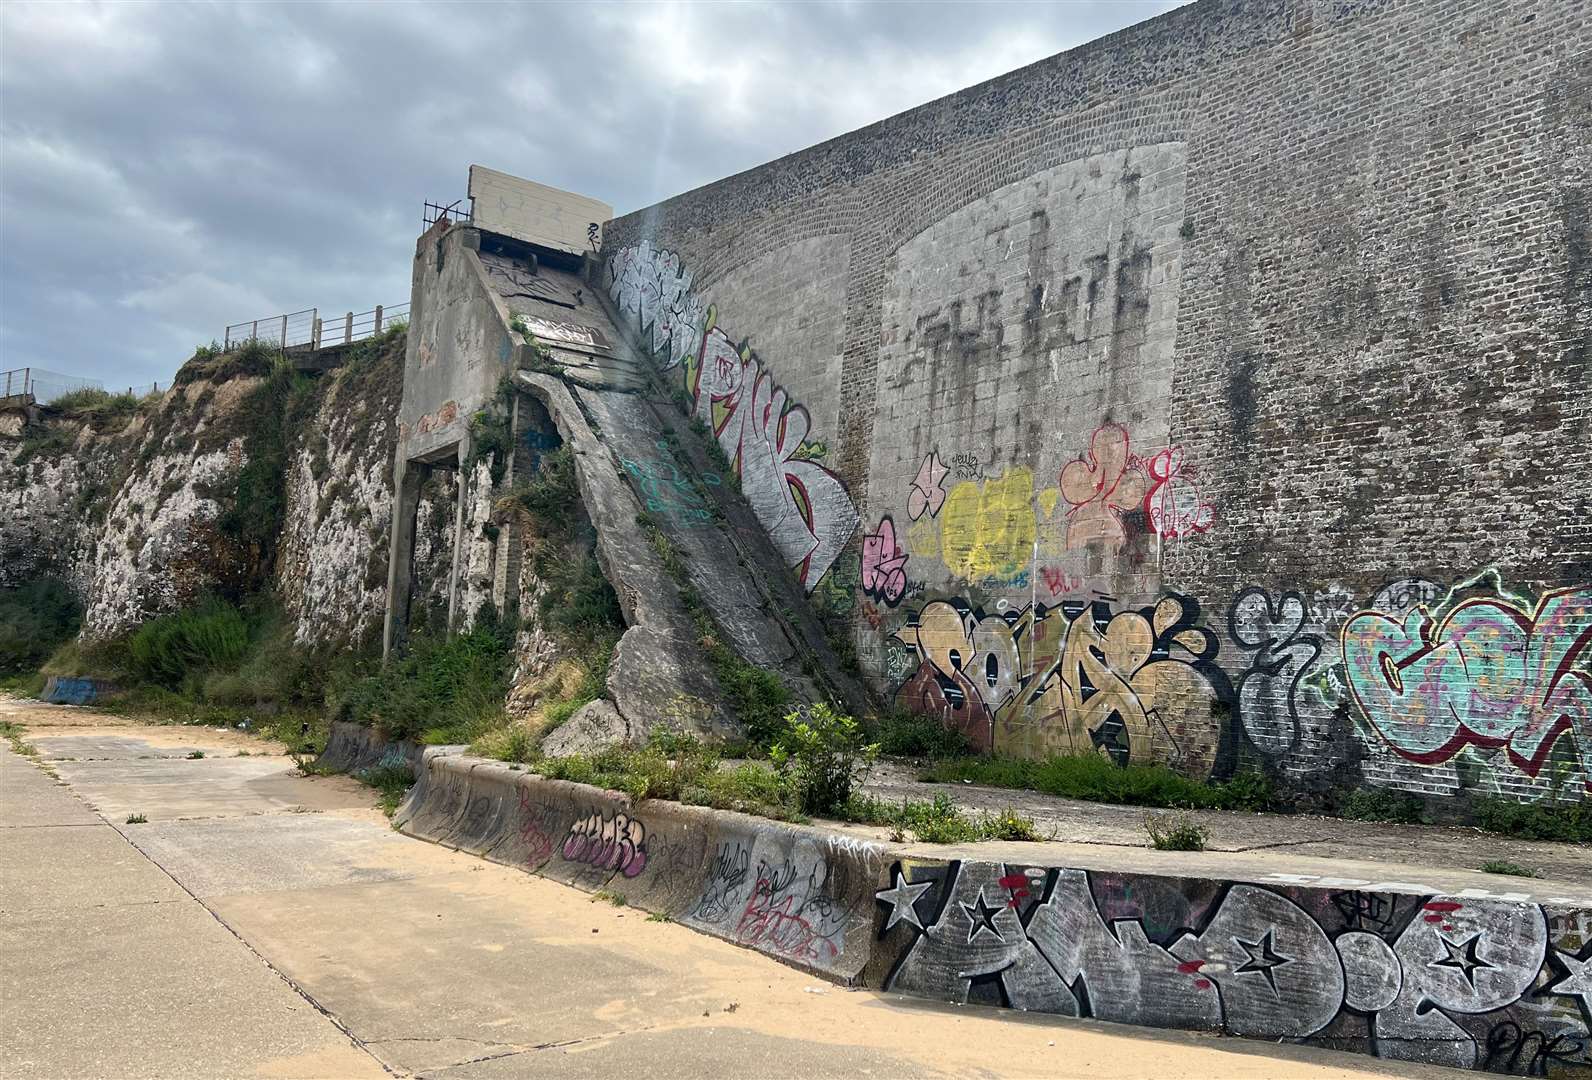 A small funicular-style lift used to transport people up and down from the top of the cliff to the Lido's pool below - today the structure is crumbling away